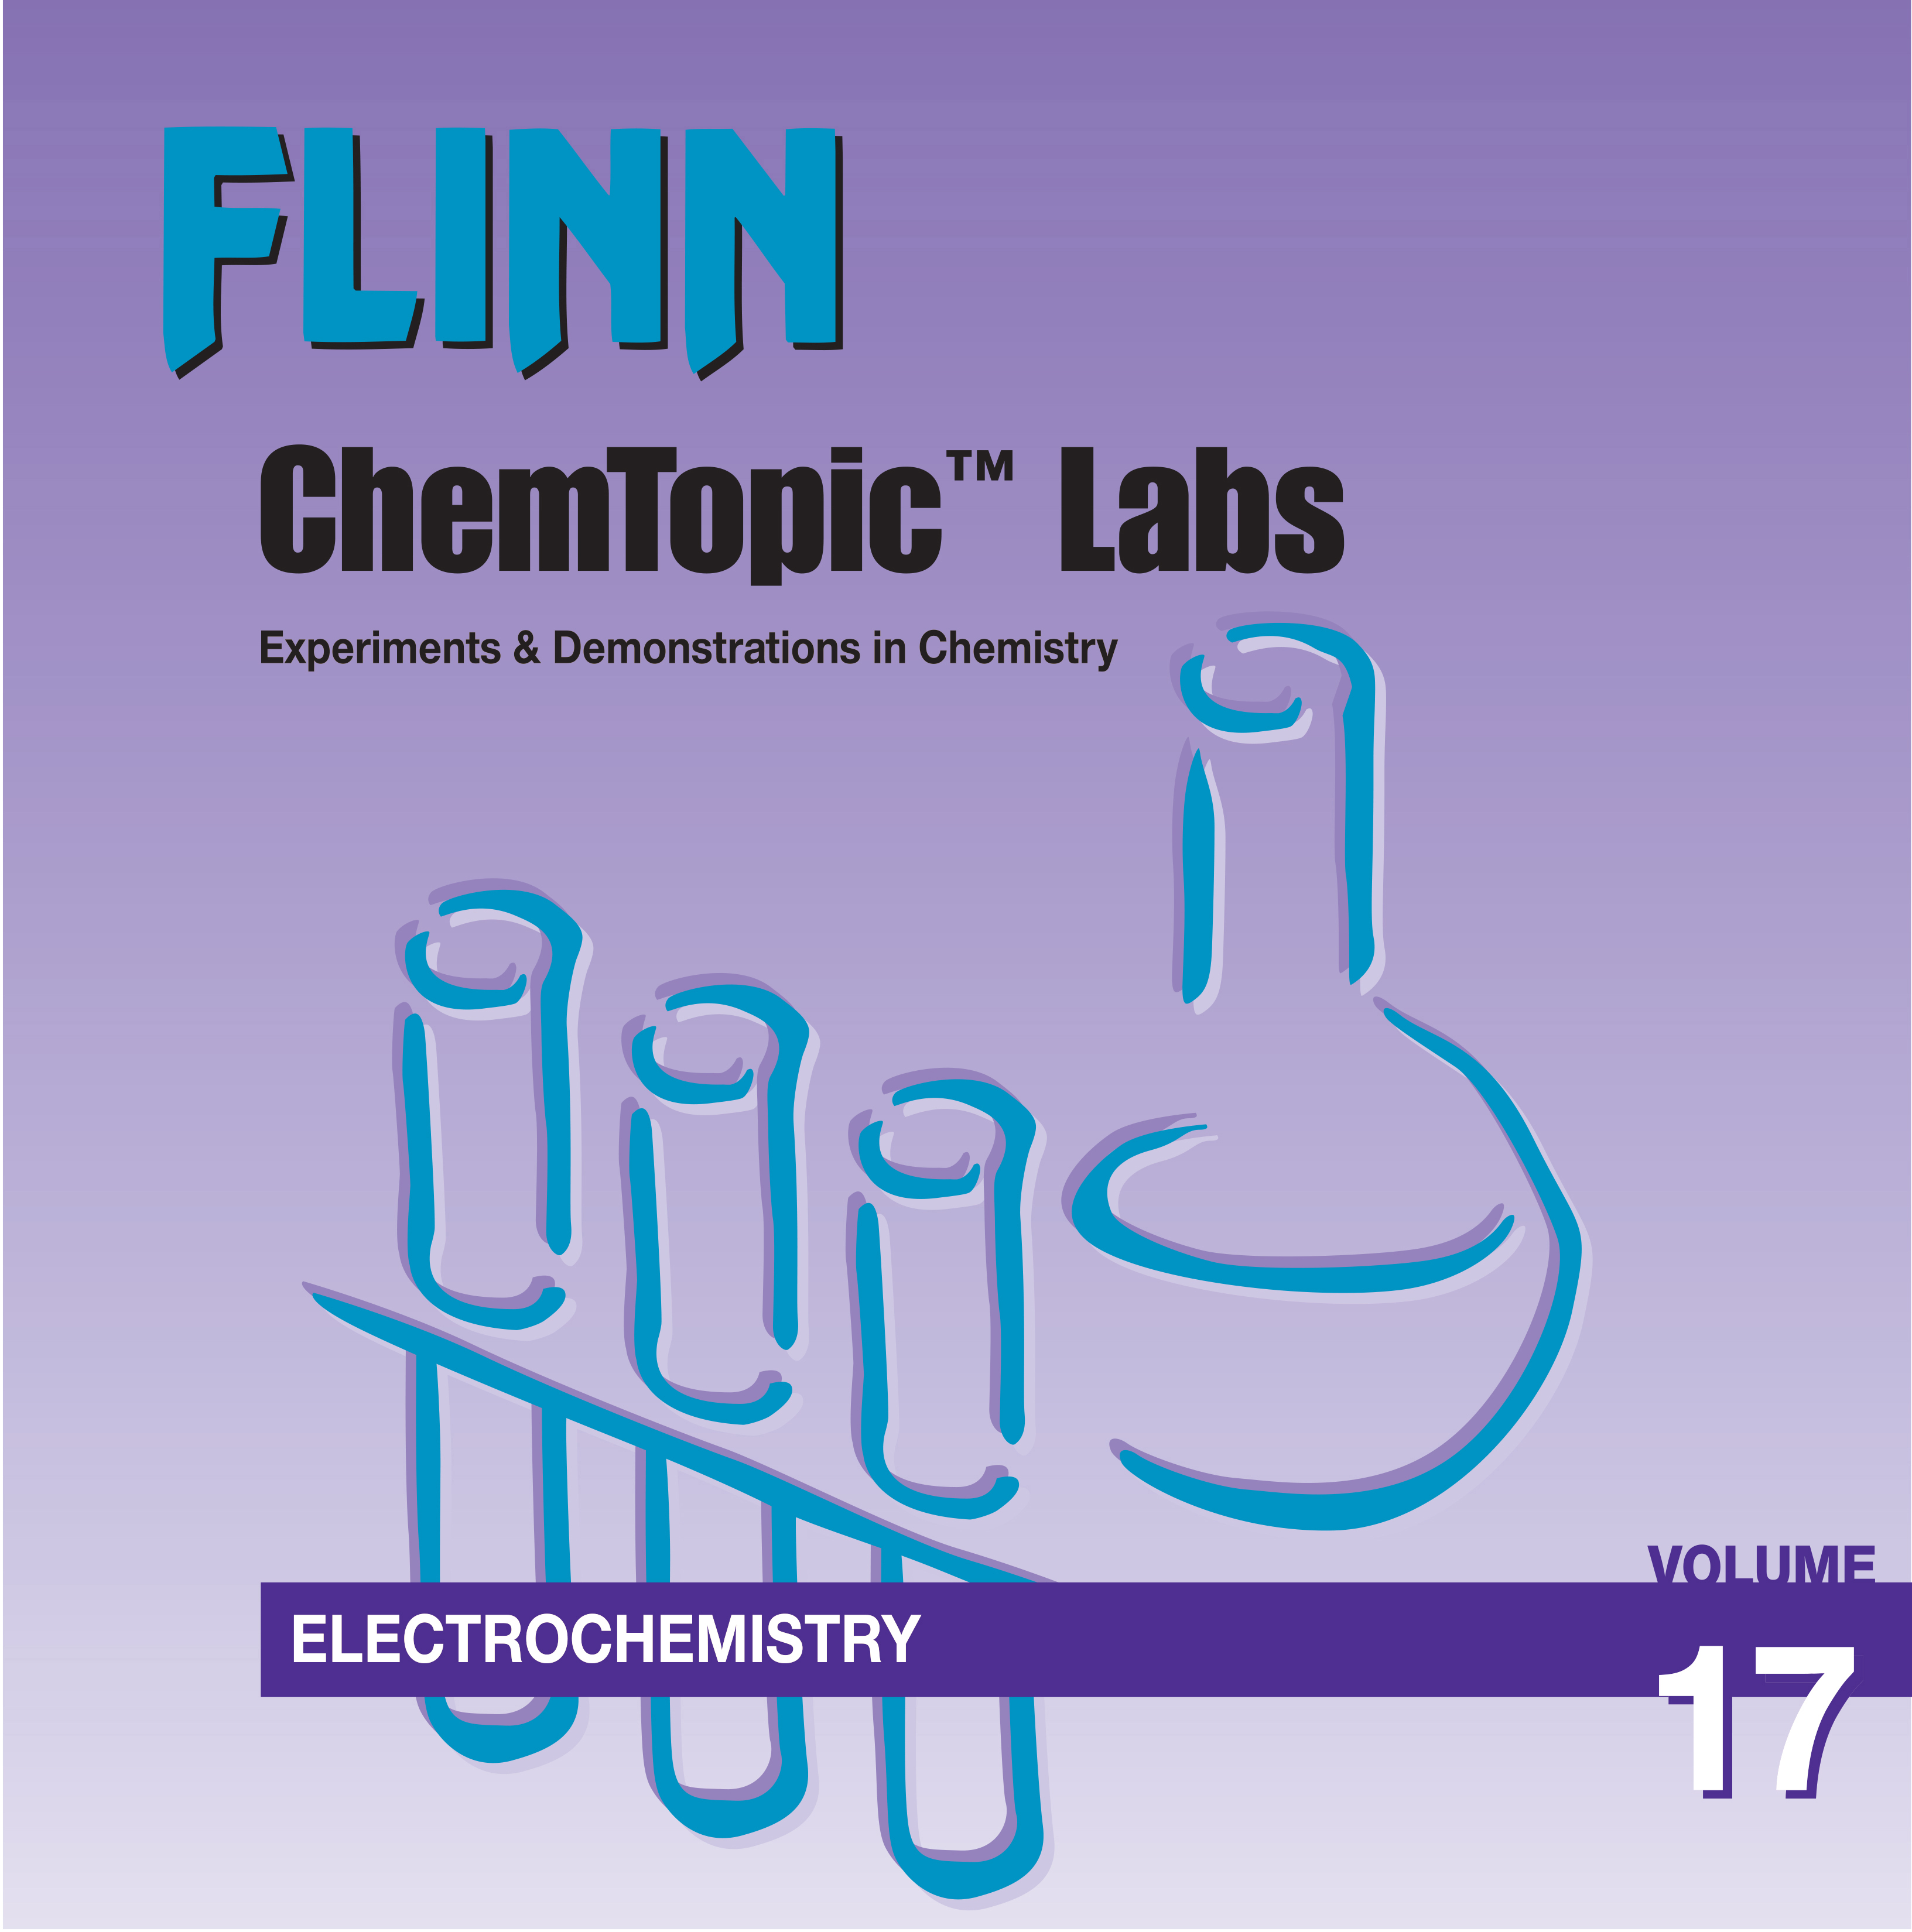 Electrochemistry—ChemTopic™ Labs Digital Collection